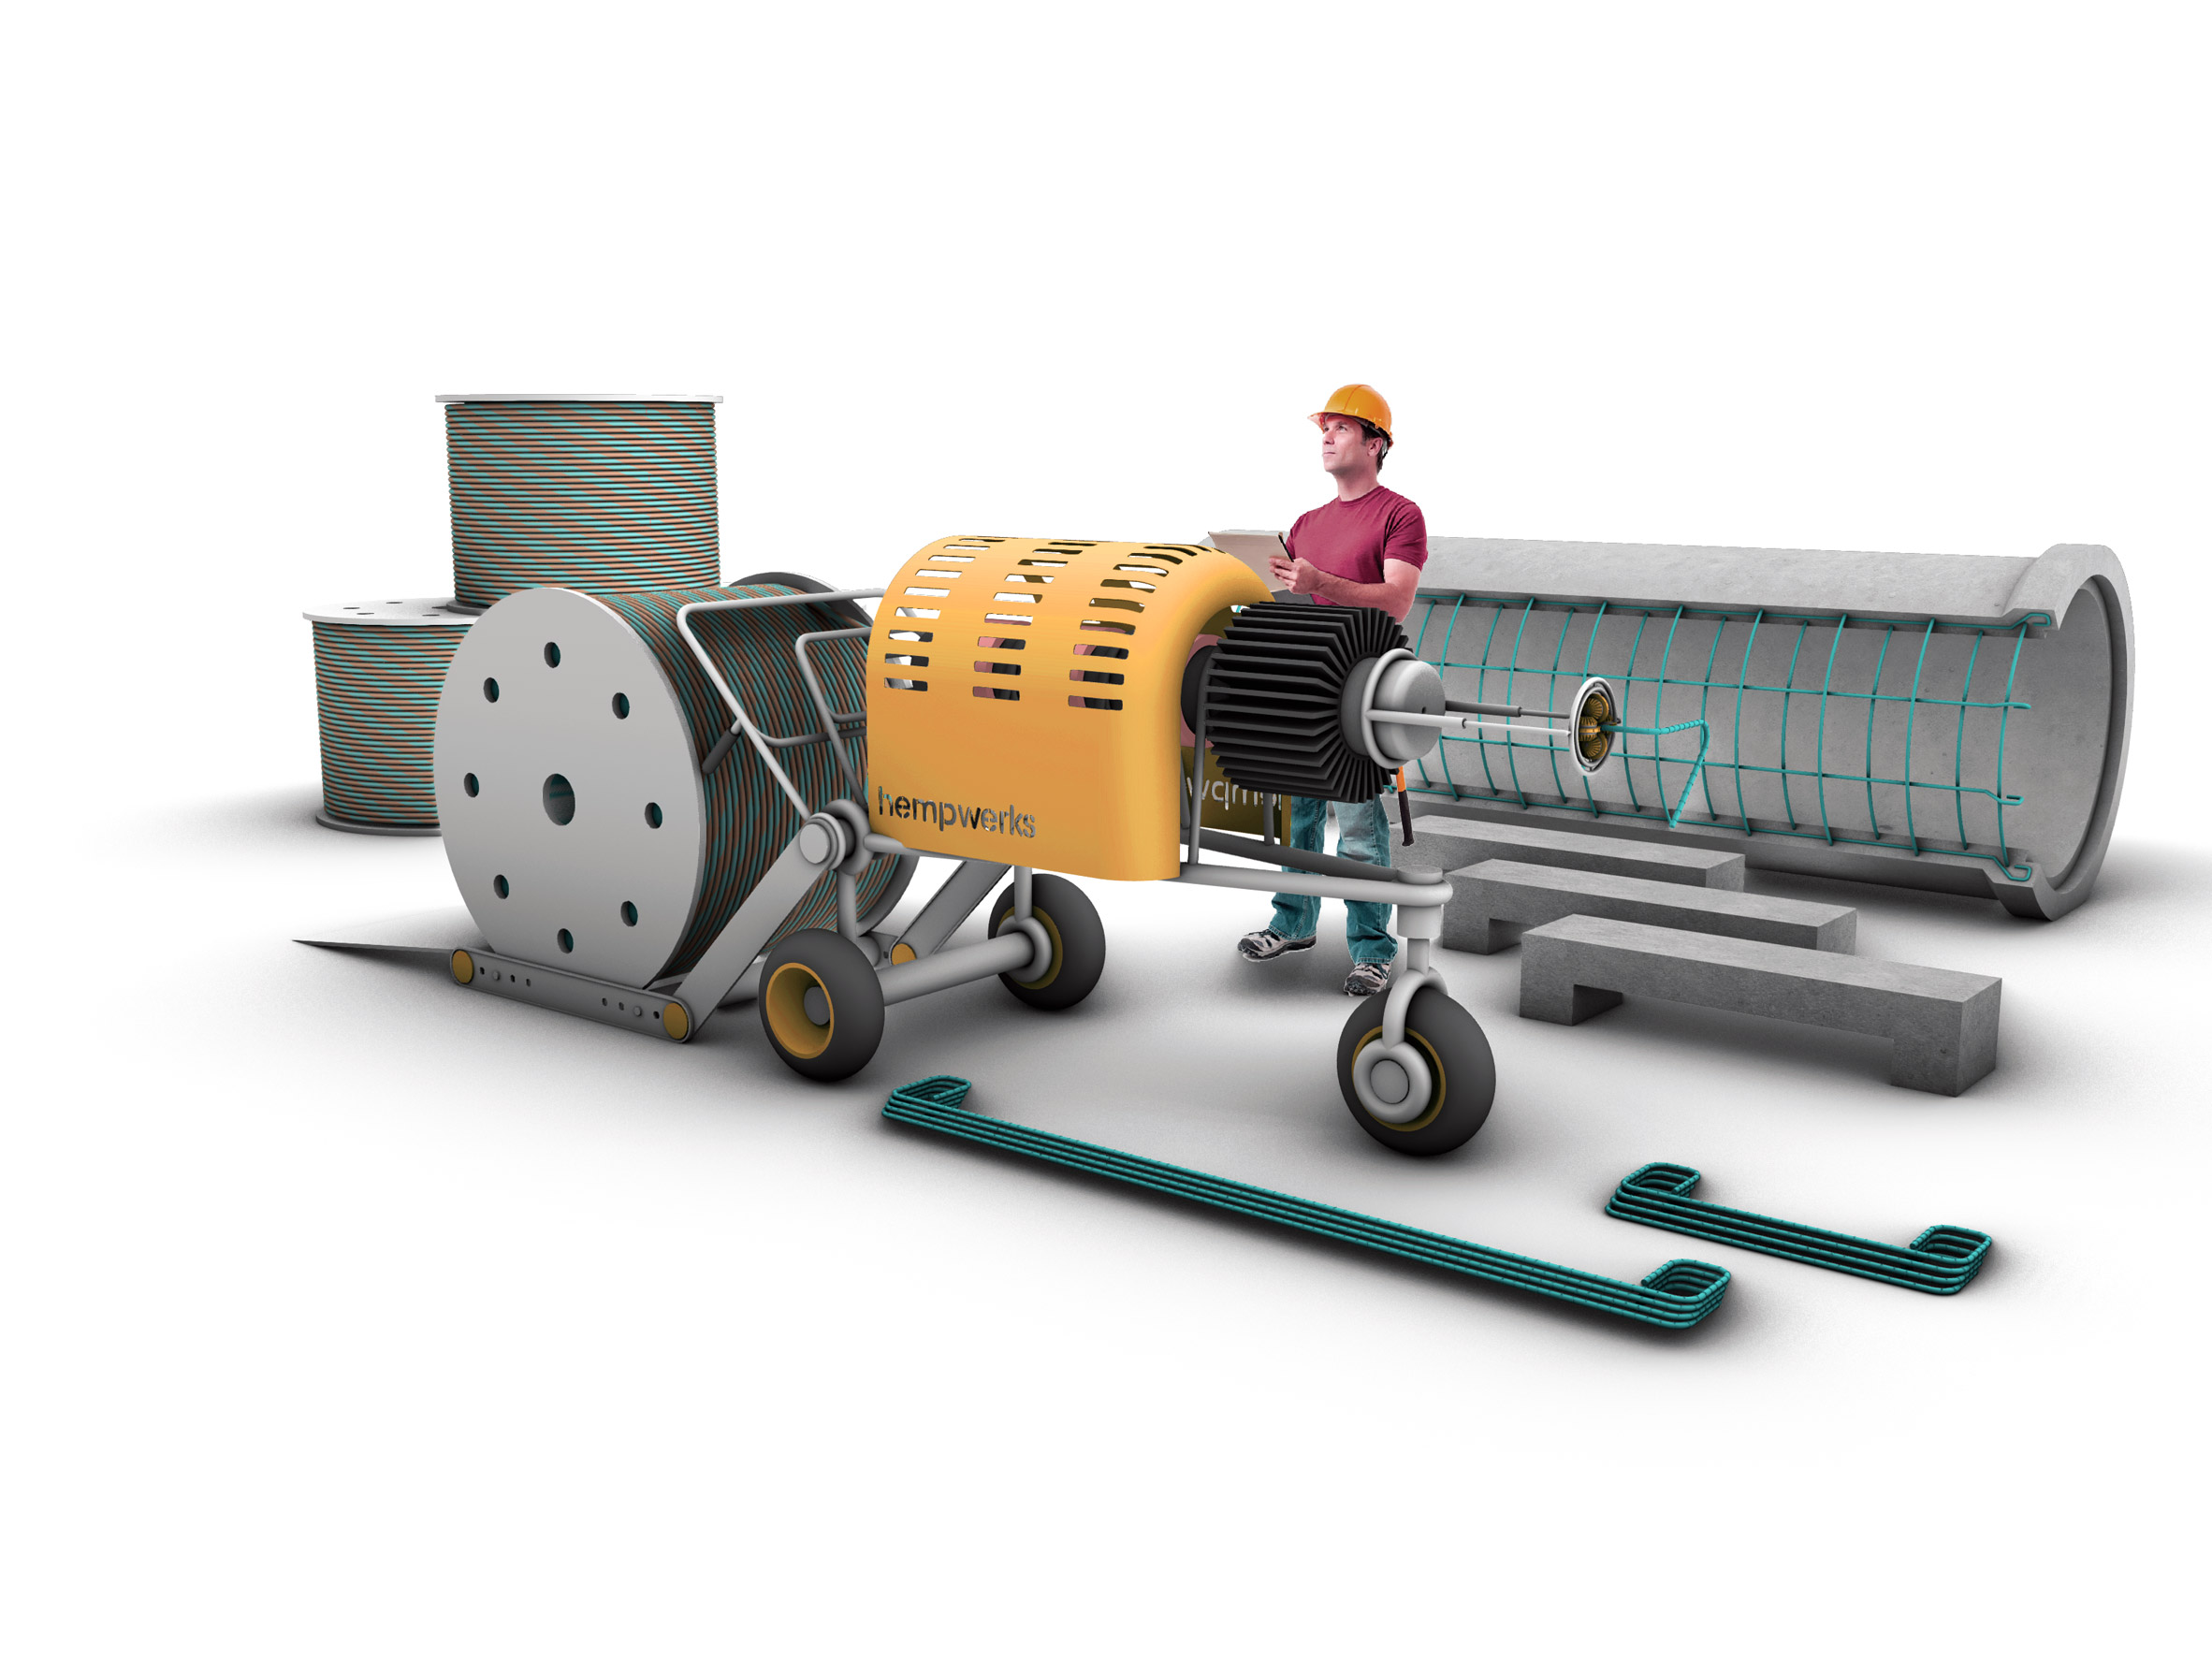 Rendering of the machine for making hemp rebar on-site with spools of rope at one end and nozzle for ejecting rebar at the other